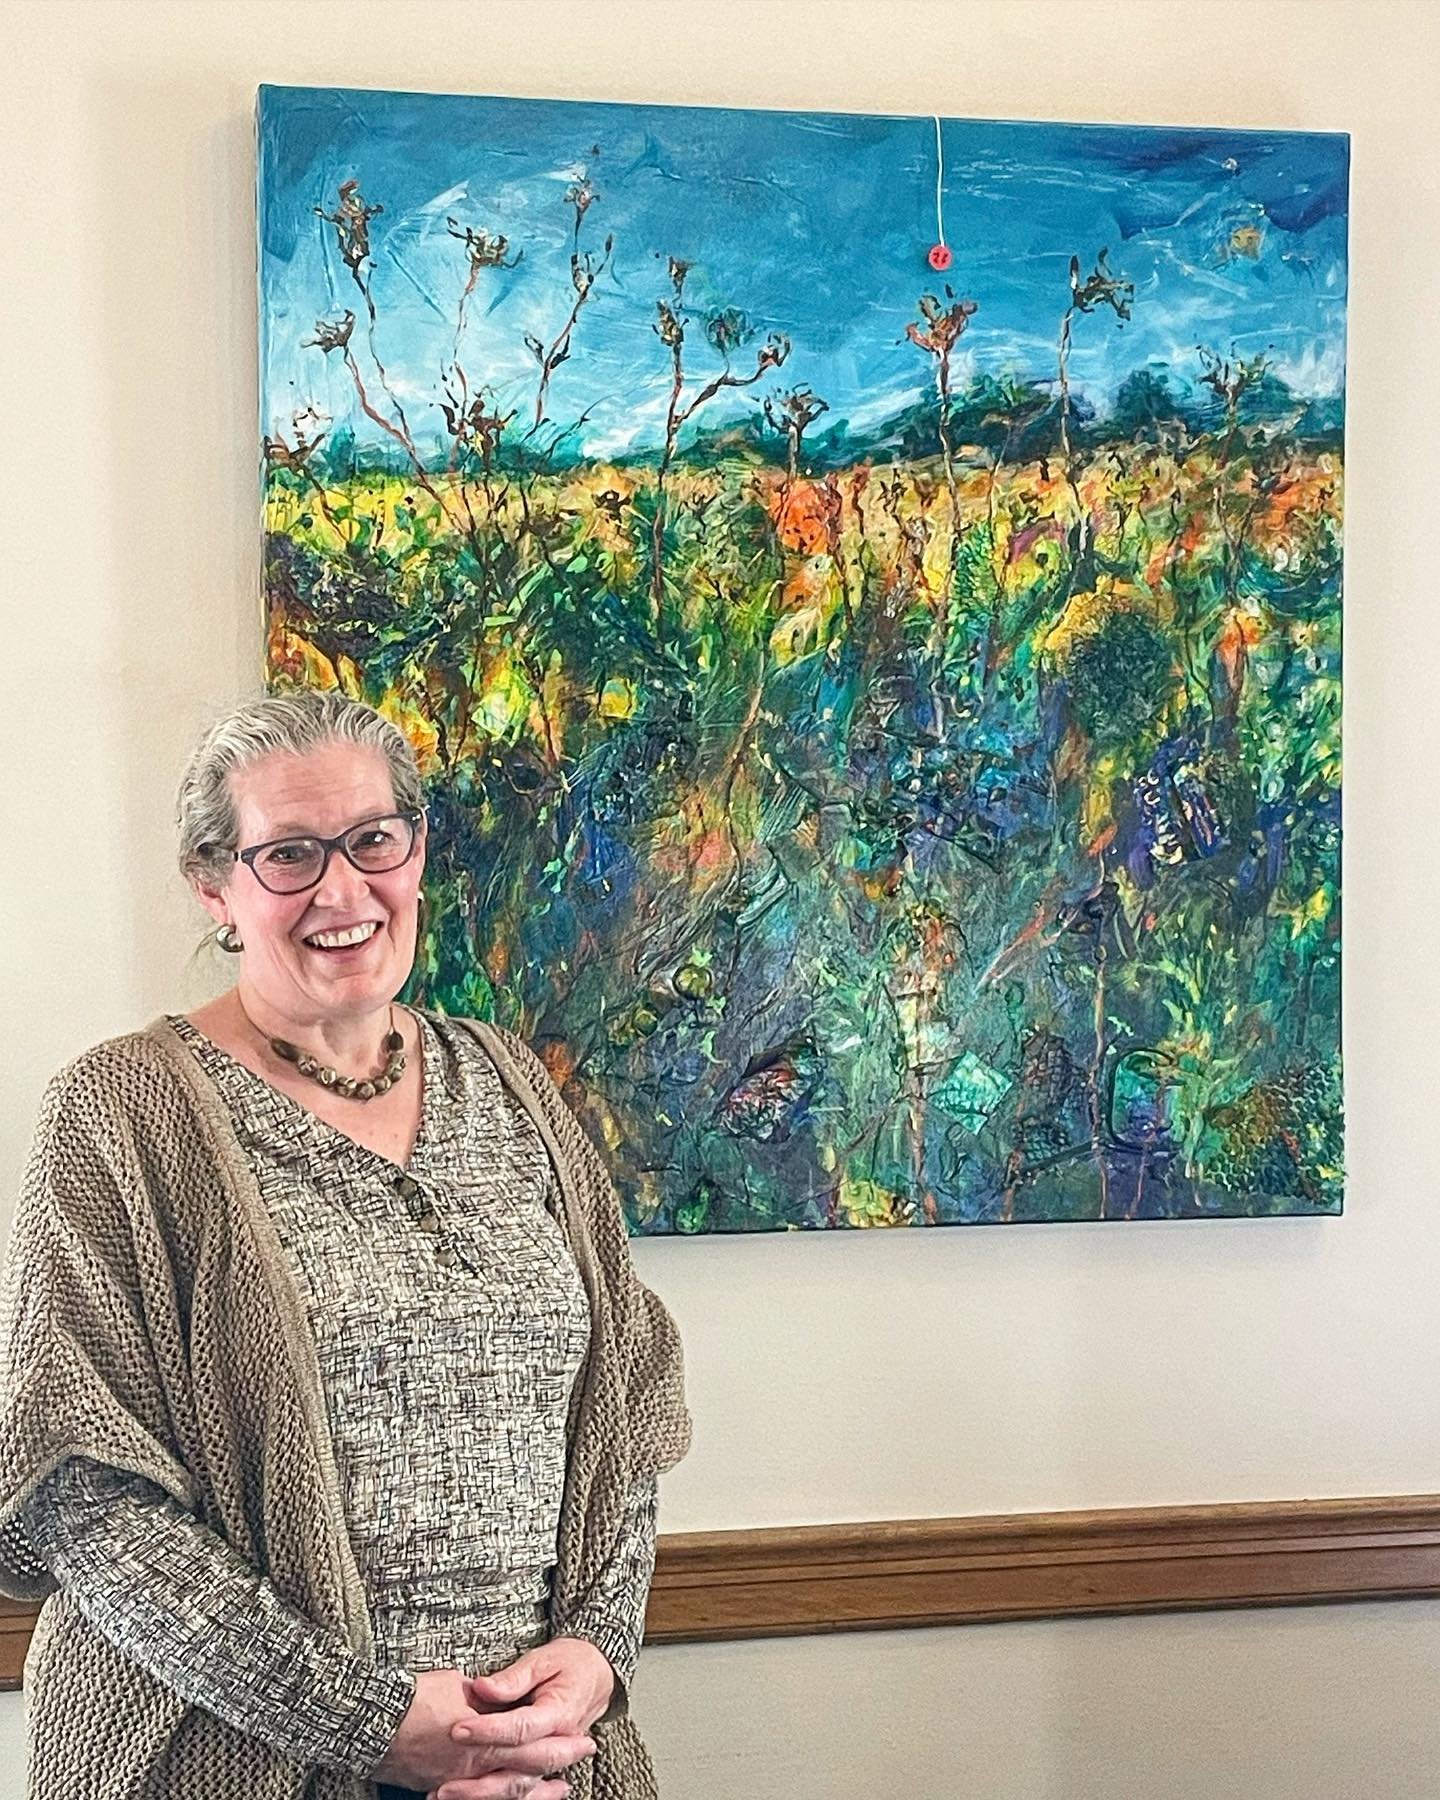 Had a wonderful night last night at the 18th Annual Art Auction at the OSU Faculty Club.  My painting, Rise Up, was part of over 60 paintings, sculptures, prints, and ceramics being auctioned.  There some very well-known artists, I was honored and aw